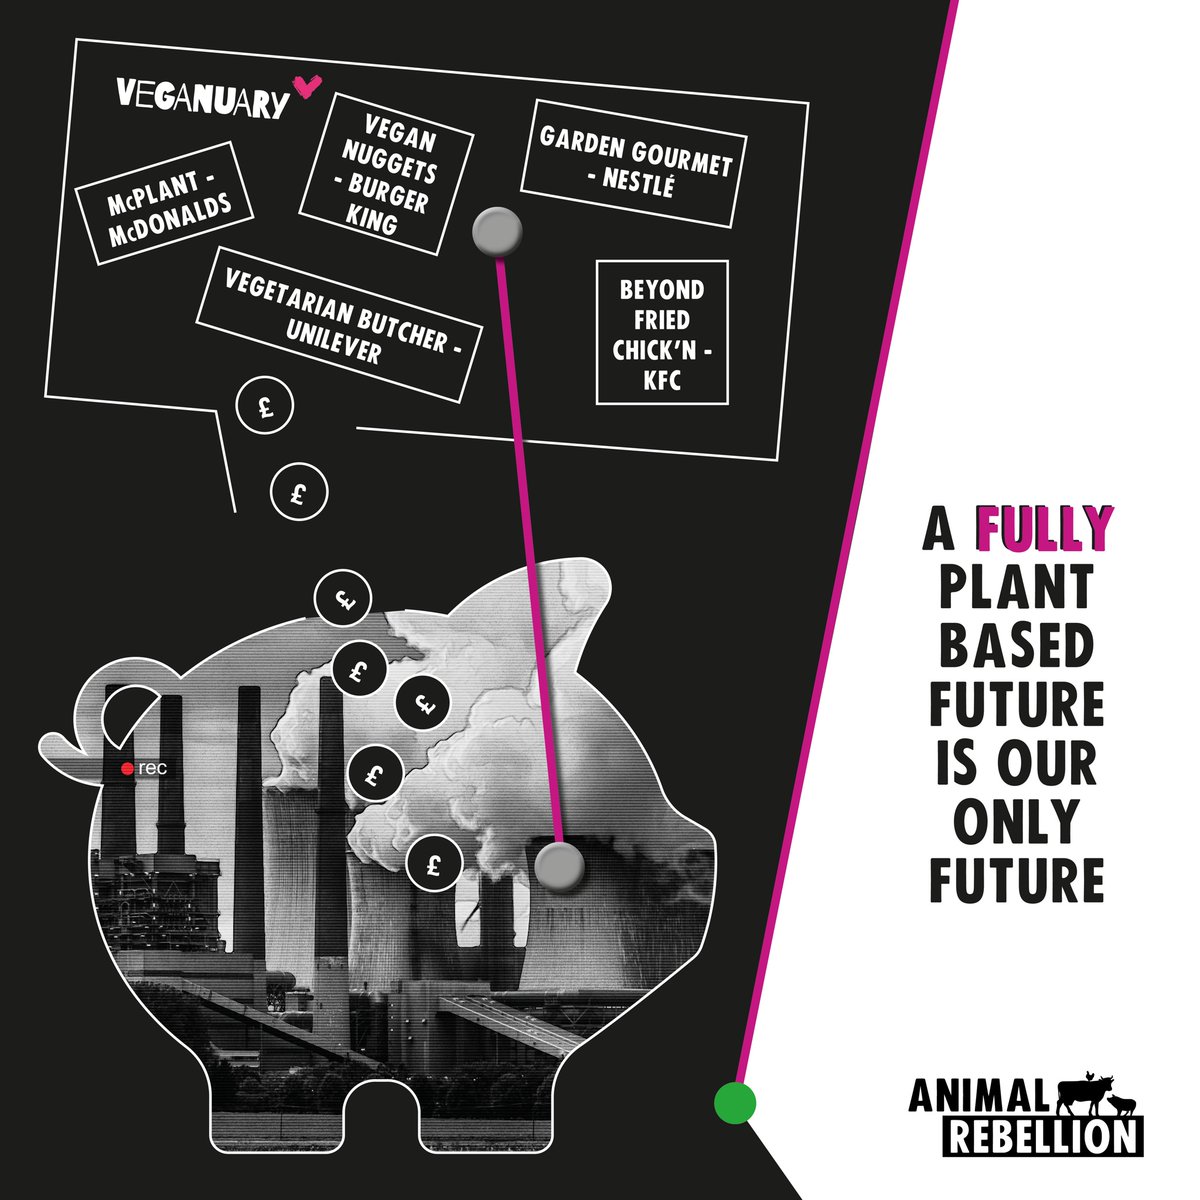 A fully plant-based future is our only future